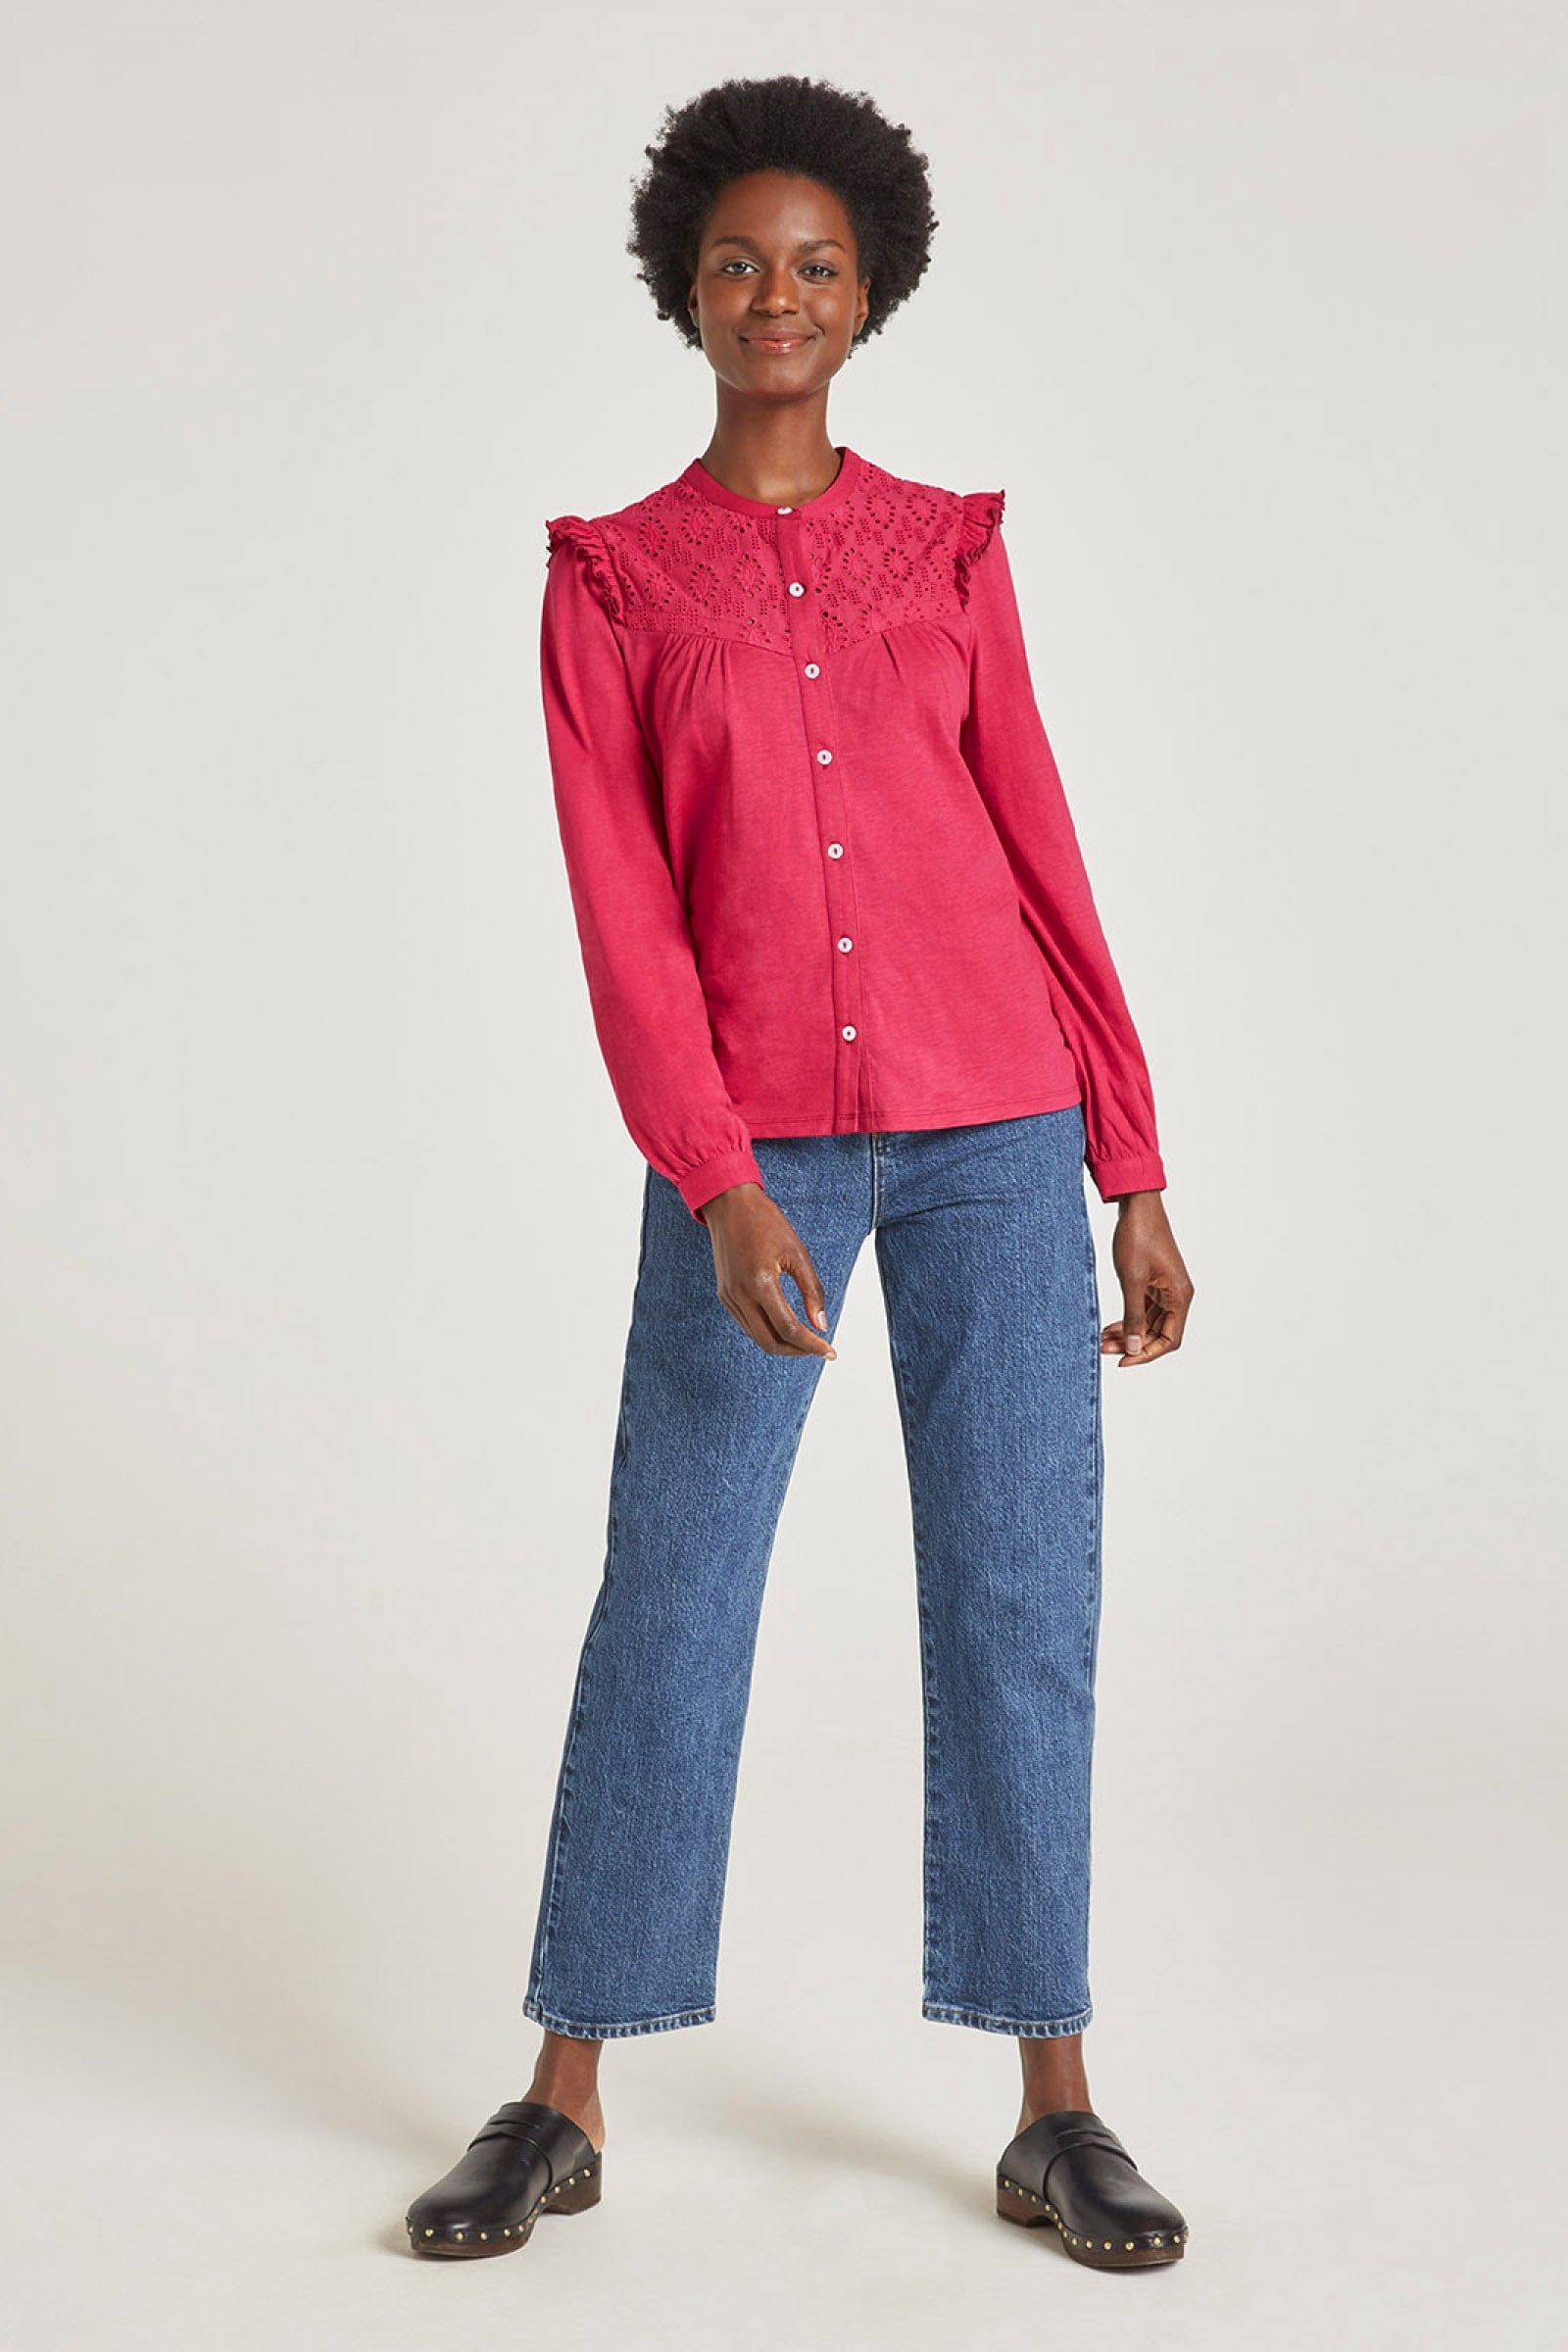 Thought Organic Cotton Pretty Broderie Blouse - Raspberry Pink